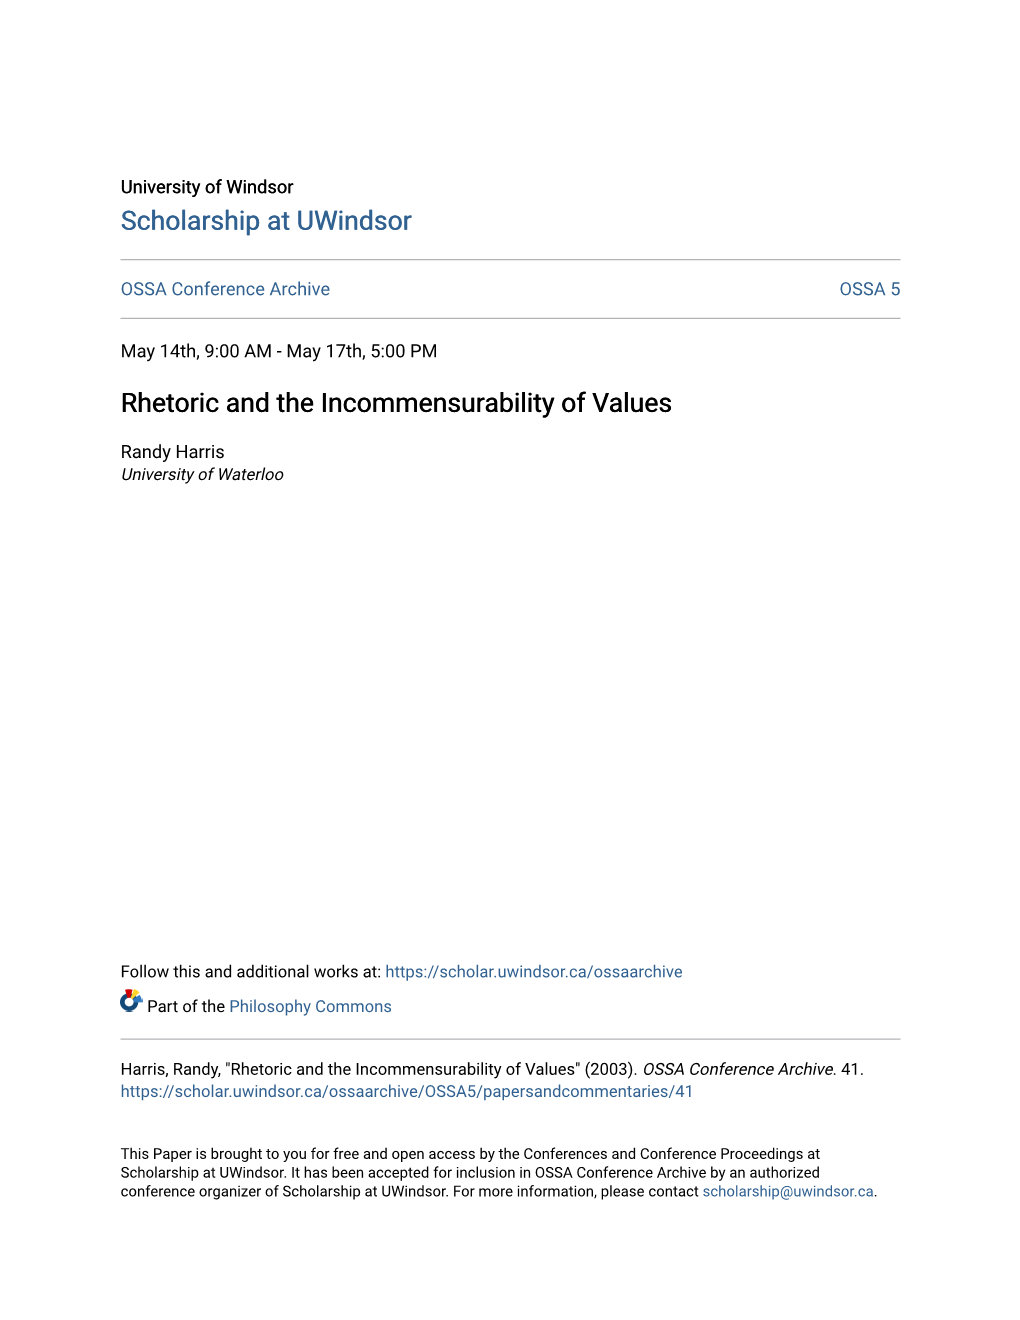 Rhetoric and the Incommensurability of Values